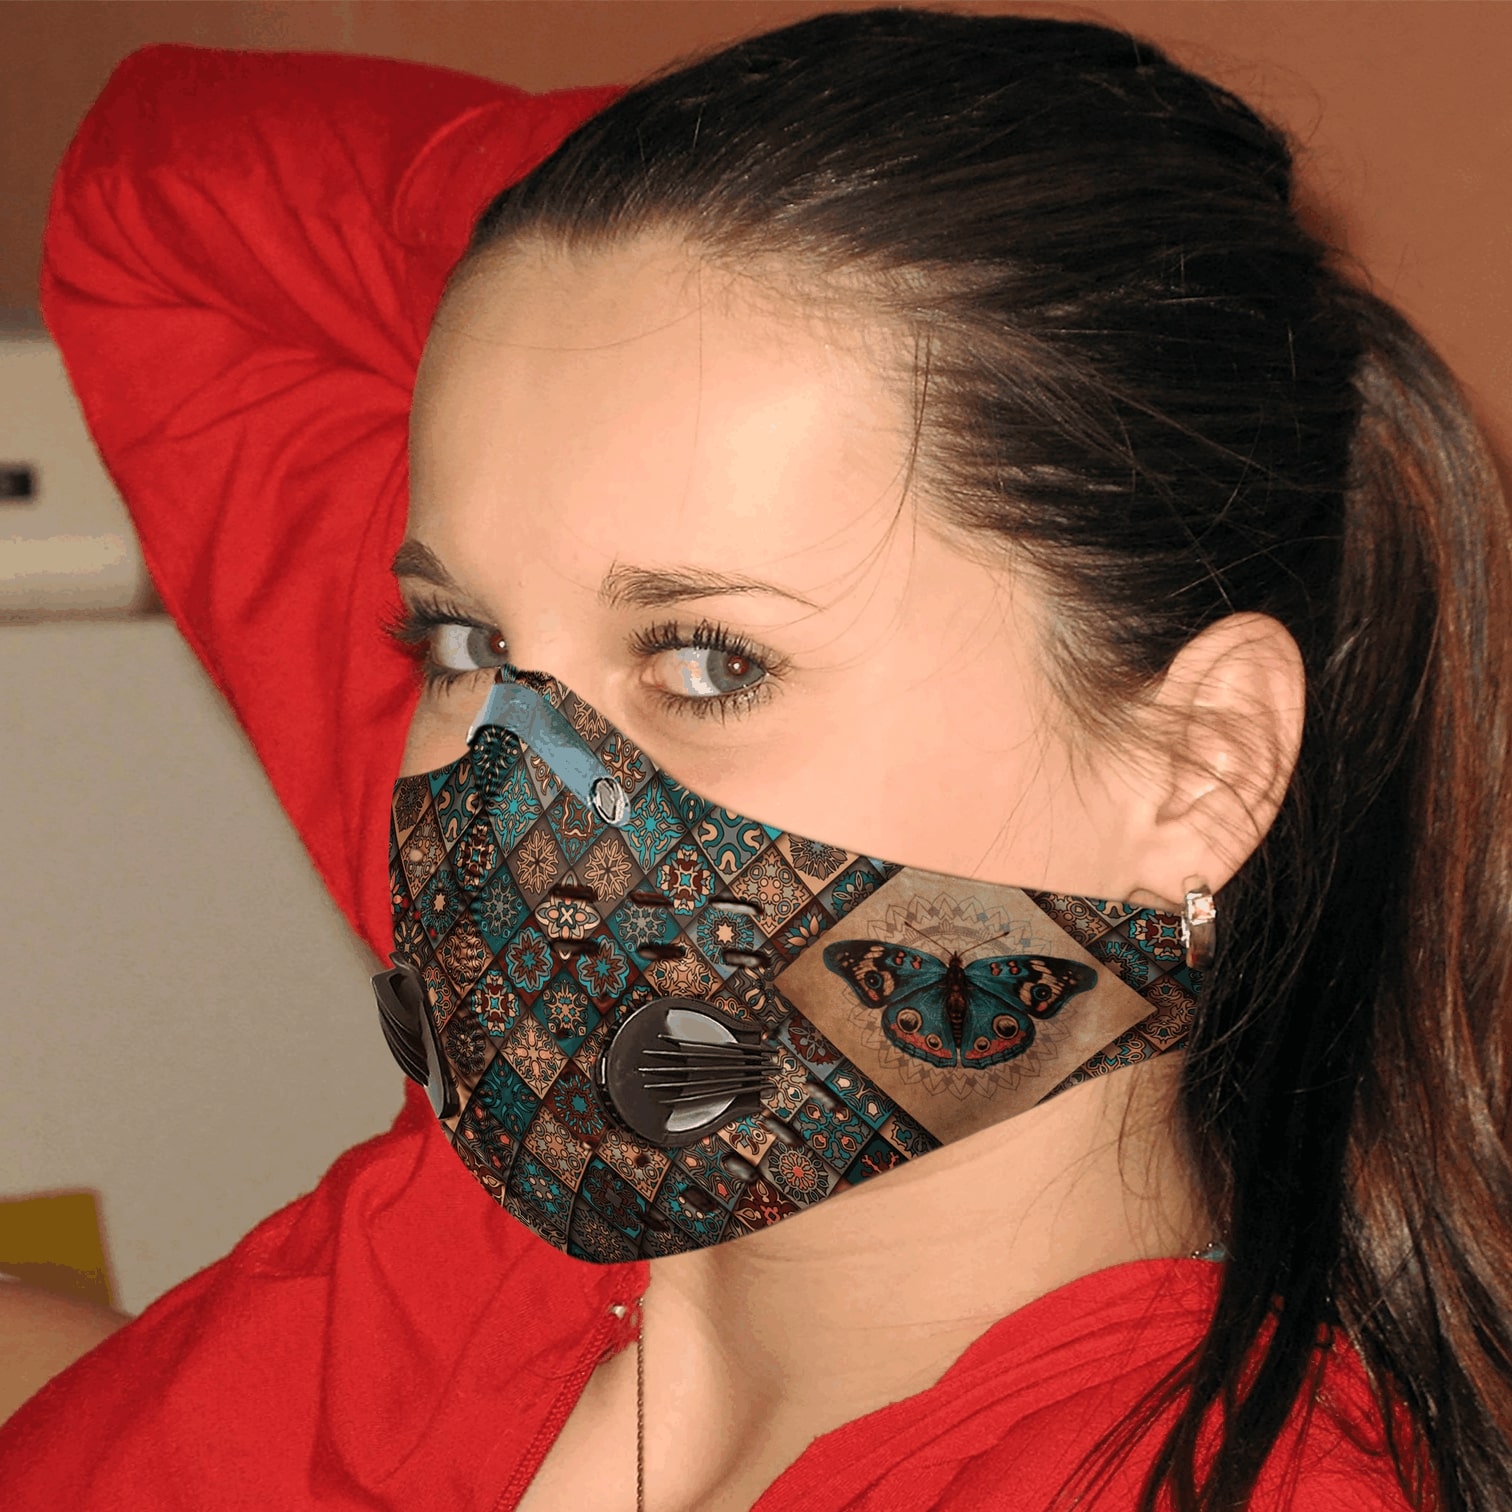 Vintage butterfly carbon pm 2.5 face mask